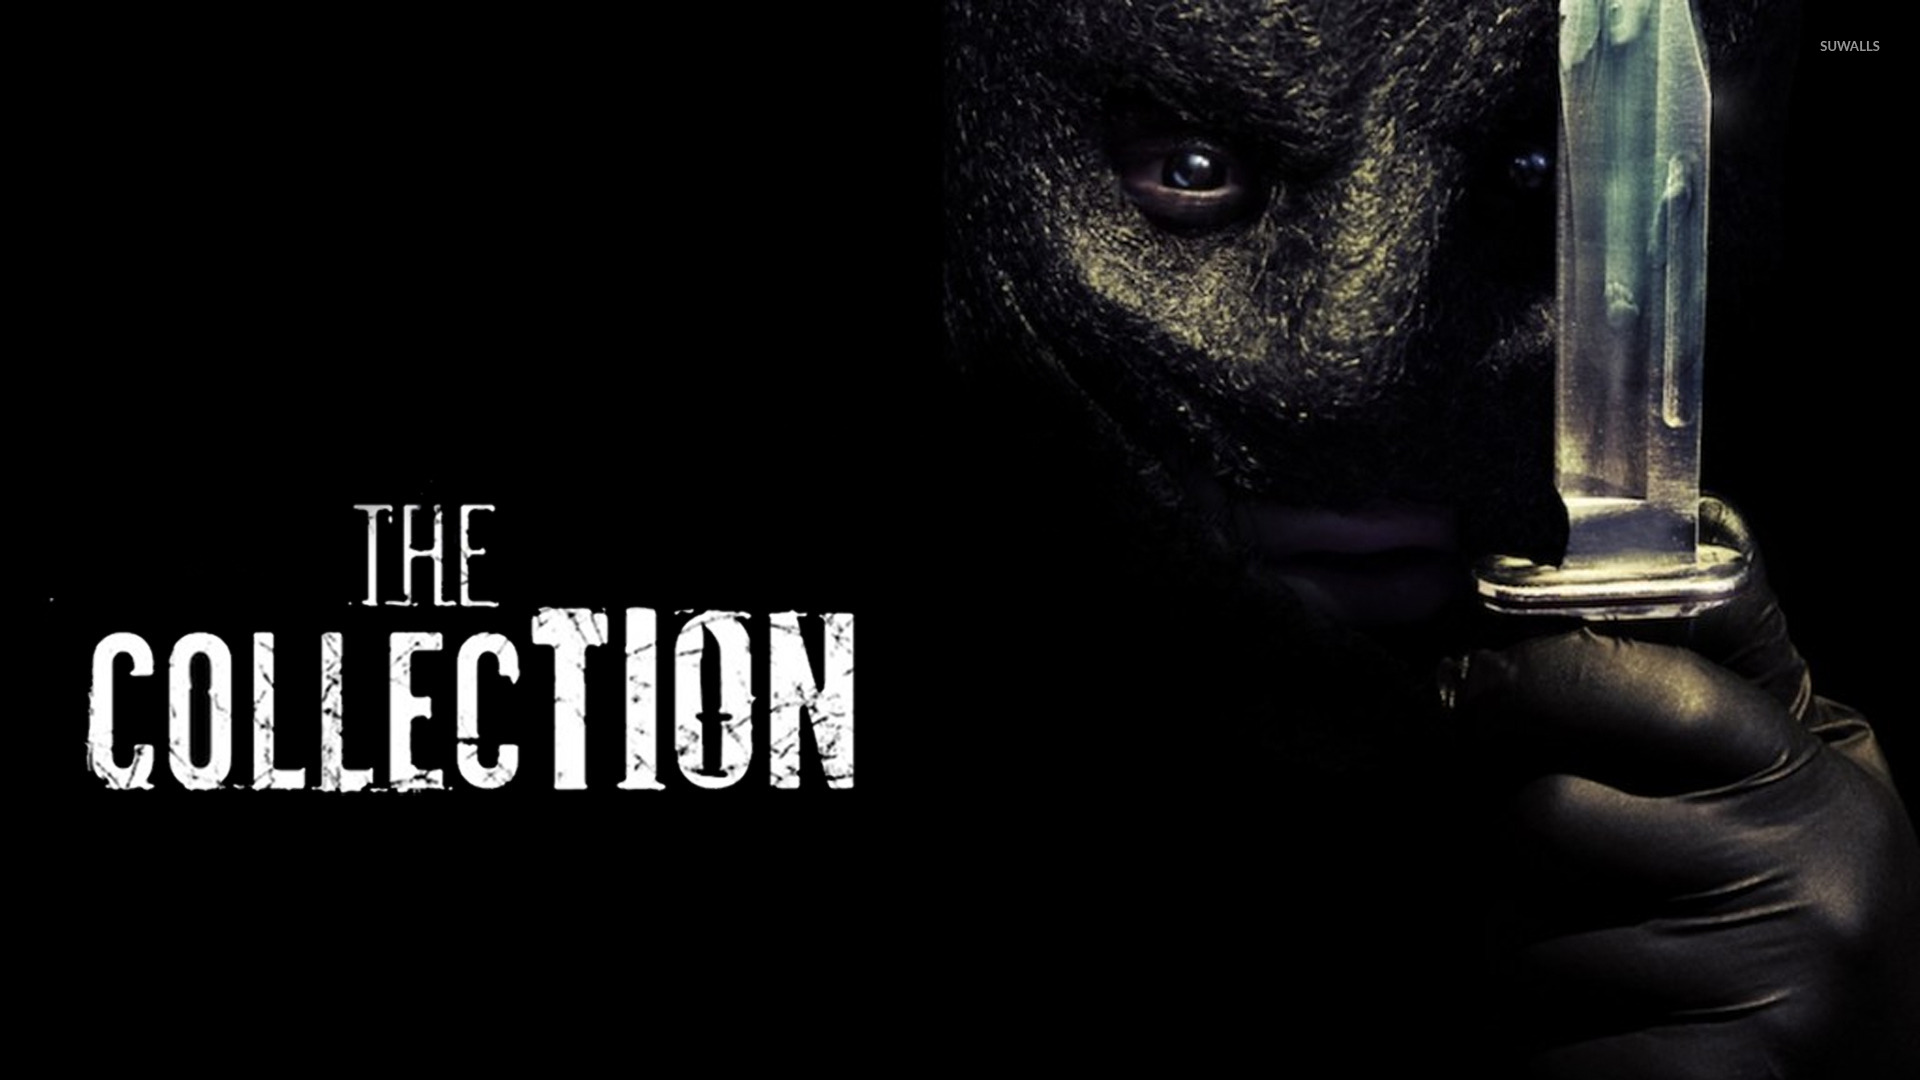 The Collector - The Collection wallpaper - Movie wallpapers - #16339